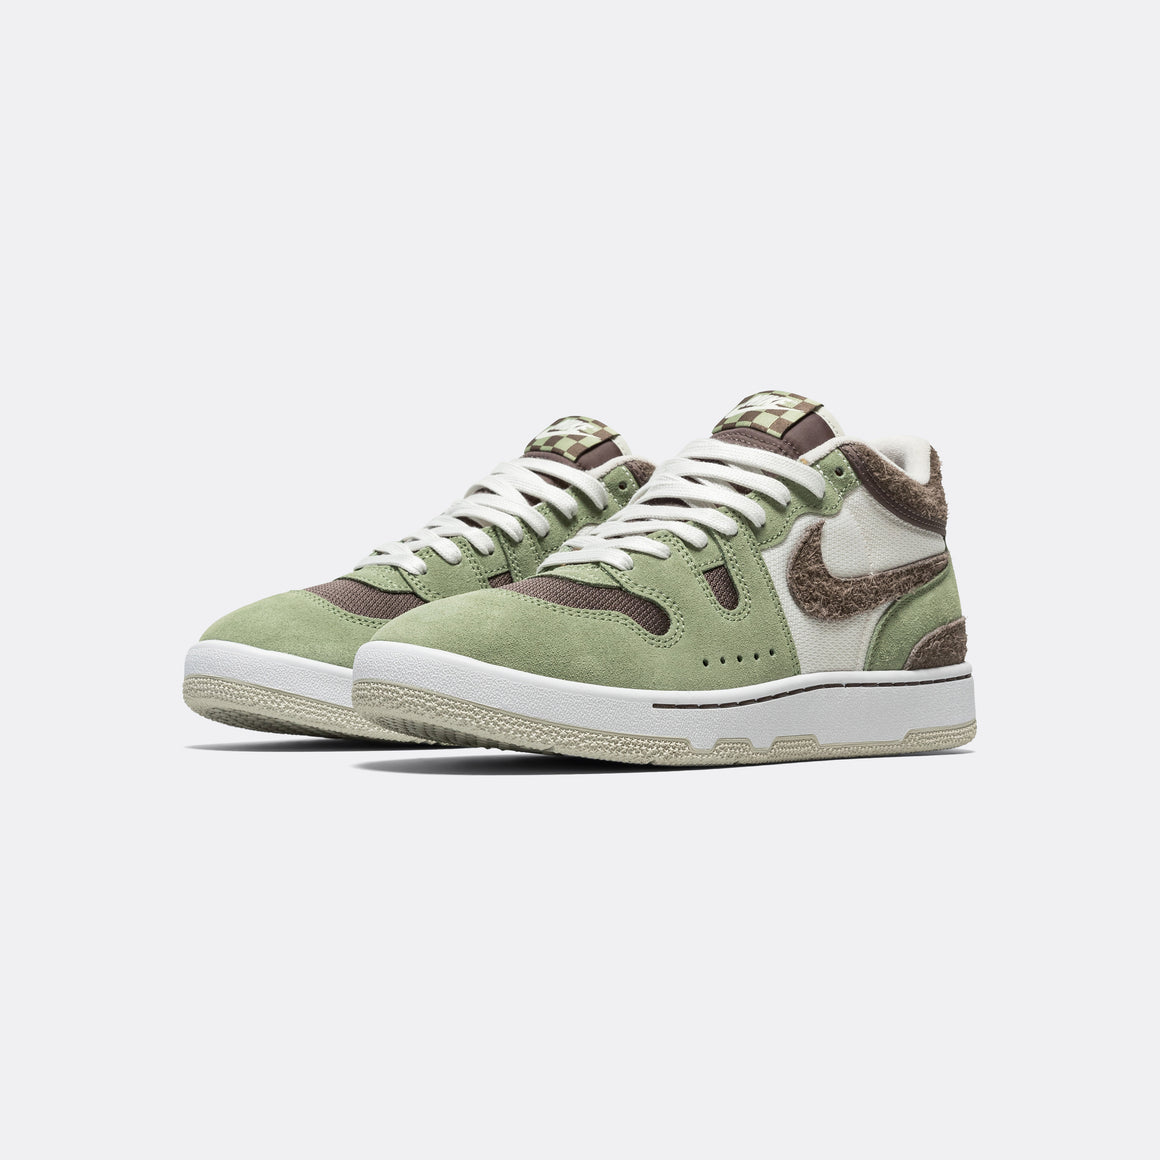 Nike - Attack - Oil Green/Ironstone-Sail - UP THERE